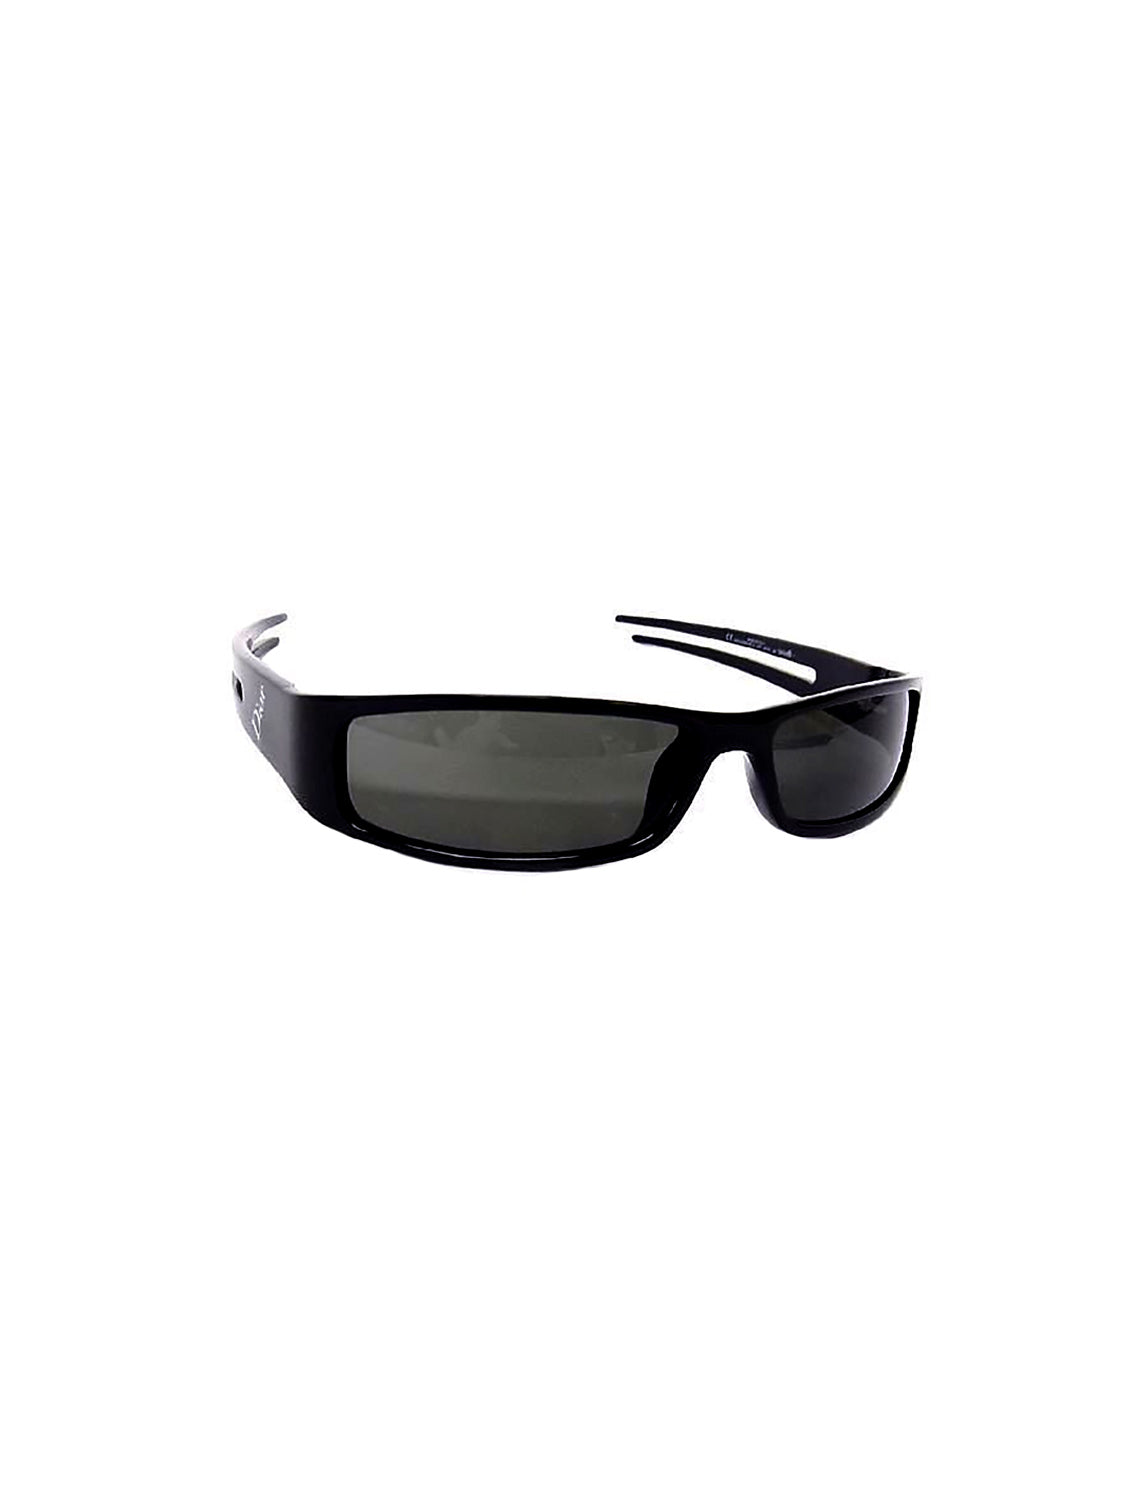 Christian Dior 2000s Thin Black Spell Out Sunglasses